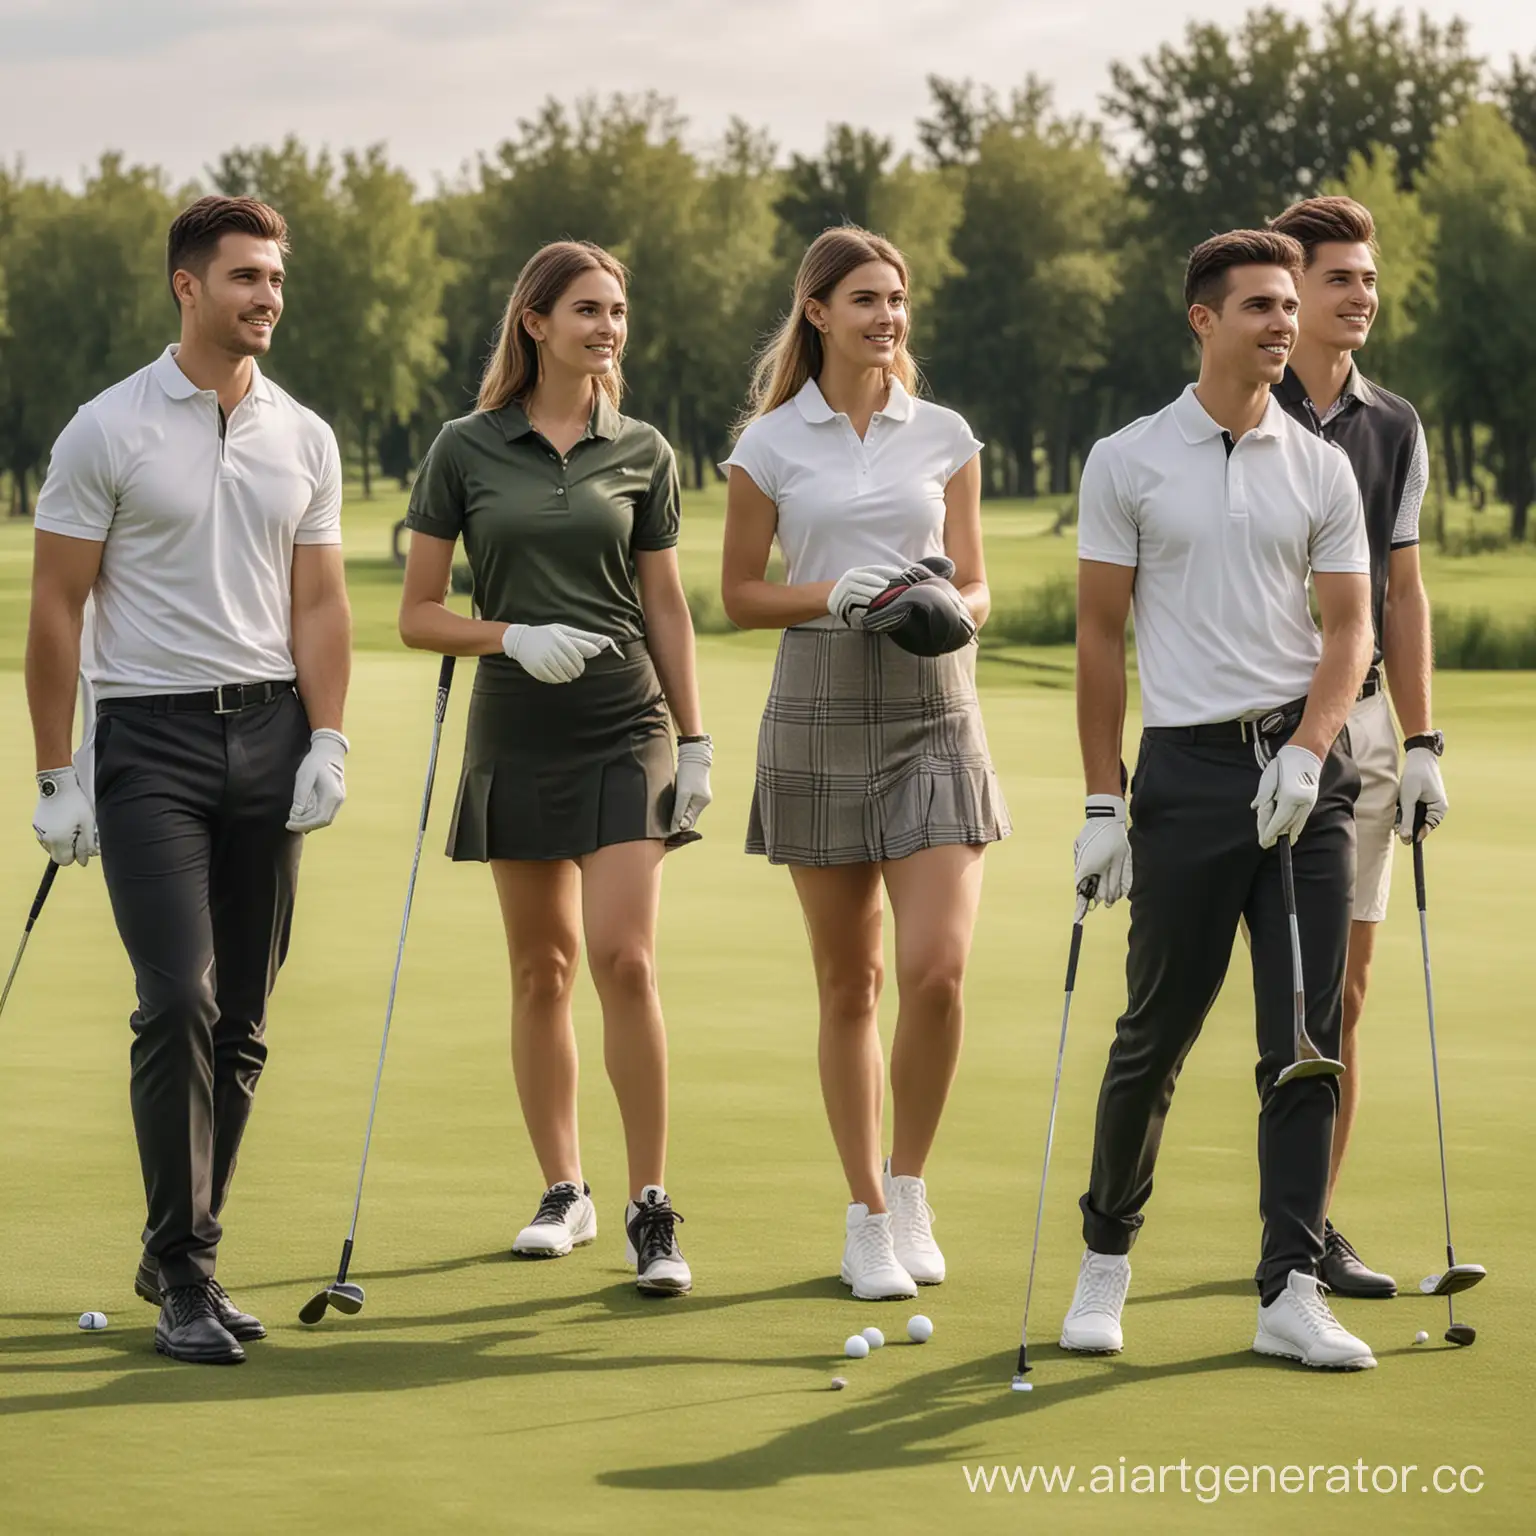 Affluent-Young-Golfers-Enjoying-Leisure-Time-Outdoors